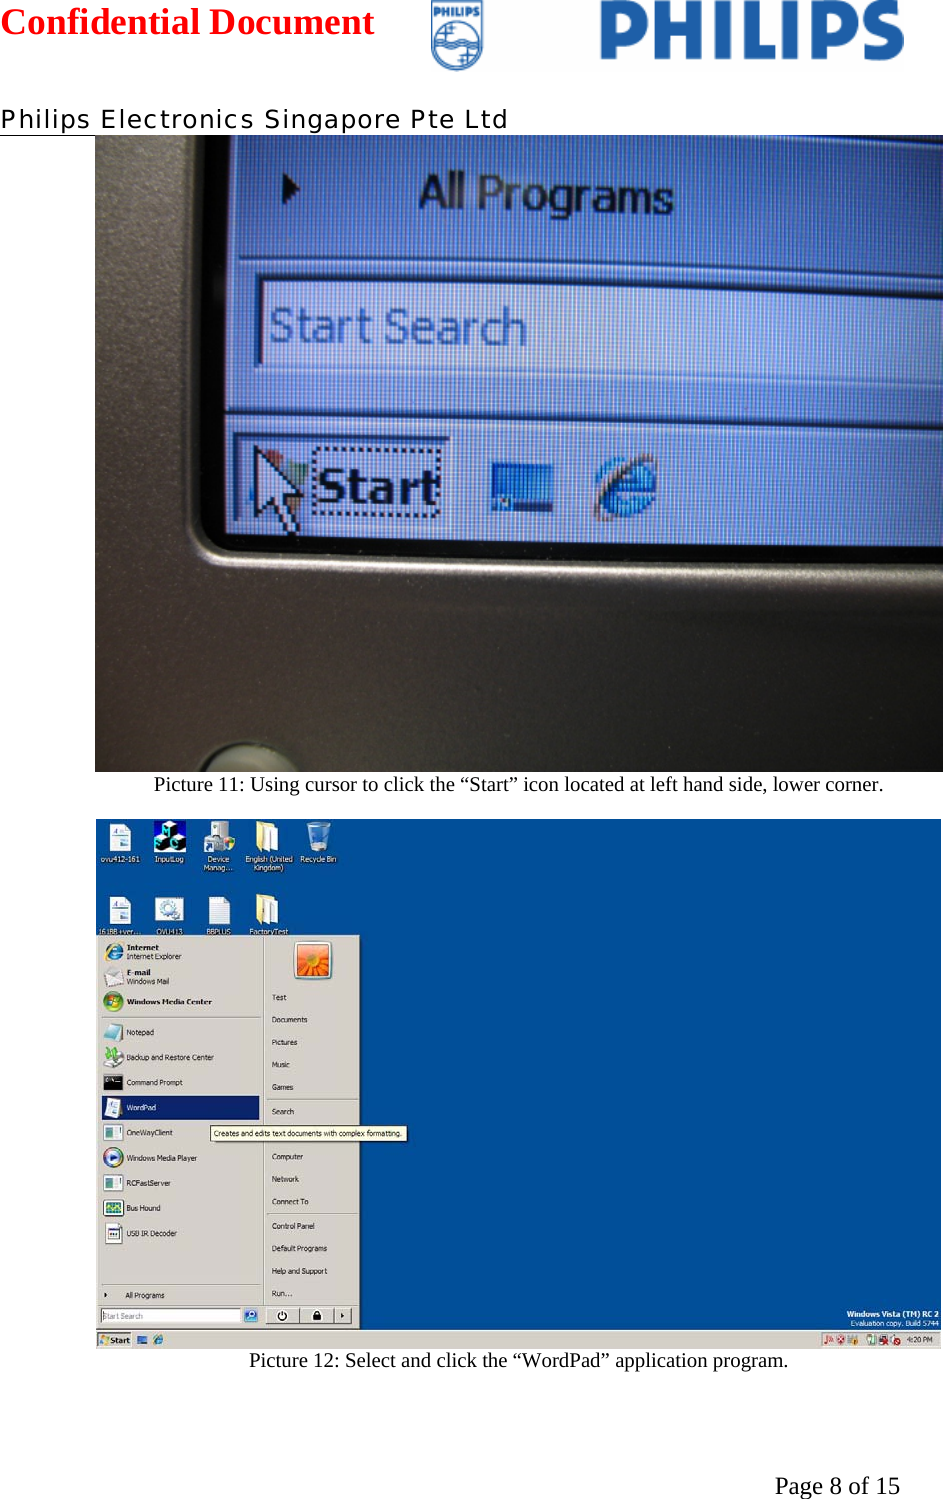 Confidential Document   Philips Electronics Singapore Pte Ltd  Page 8 of 15 Picture 11: Using cursor to click the “Start” icon located at left hand side, lower corner.   Picture 12: Select and click the “WordPad” application program.  